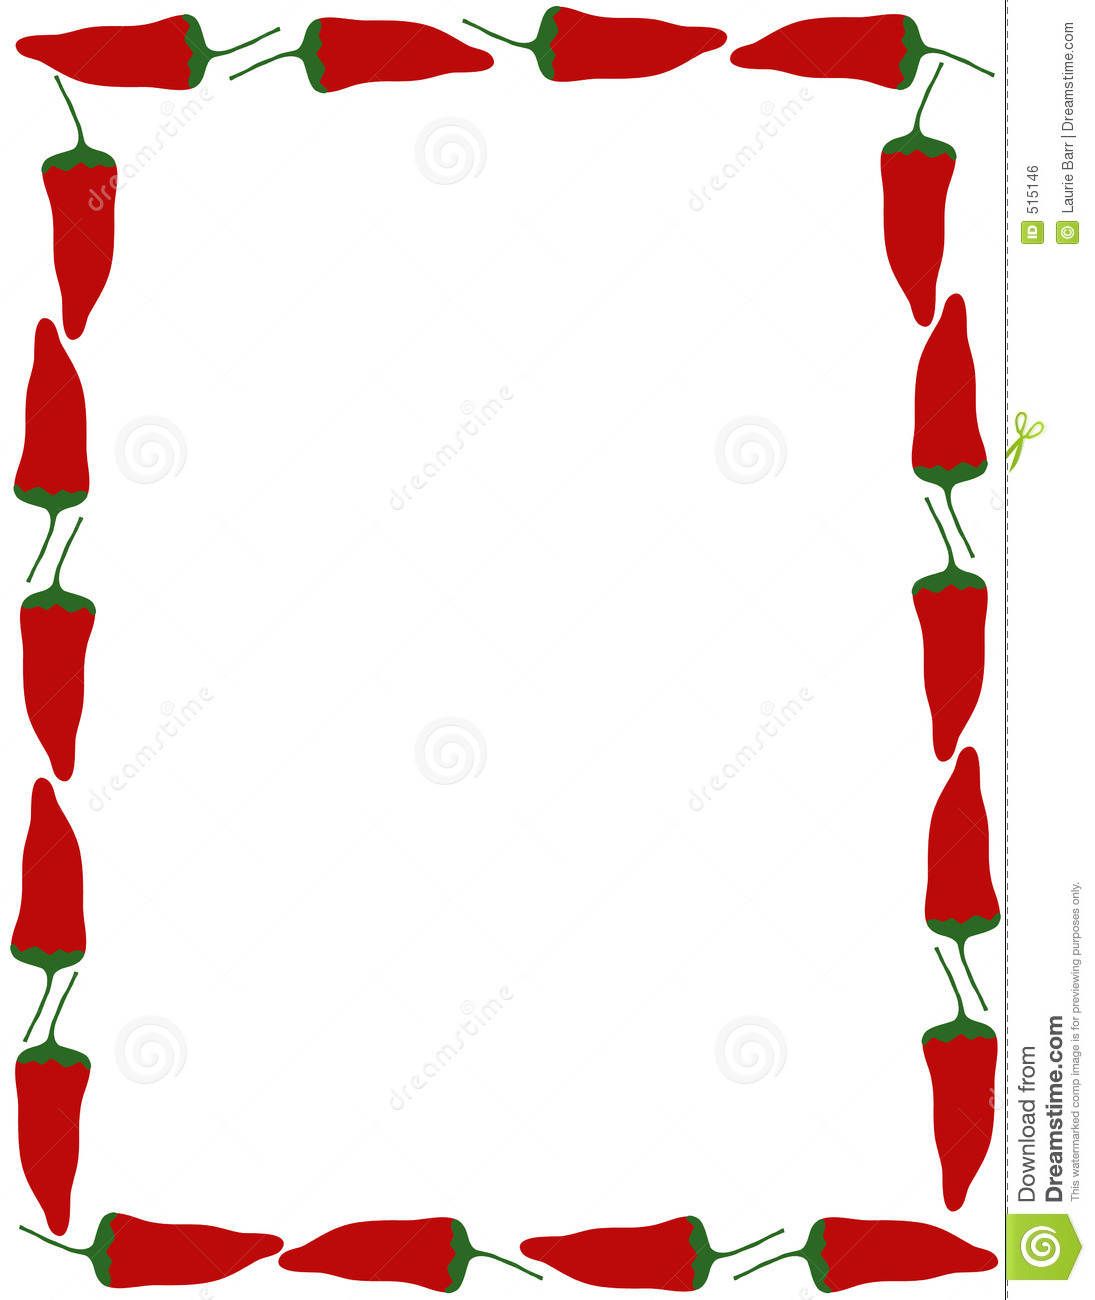 chili-pepper-border-clipart-free-download-on-clipartmag